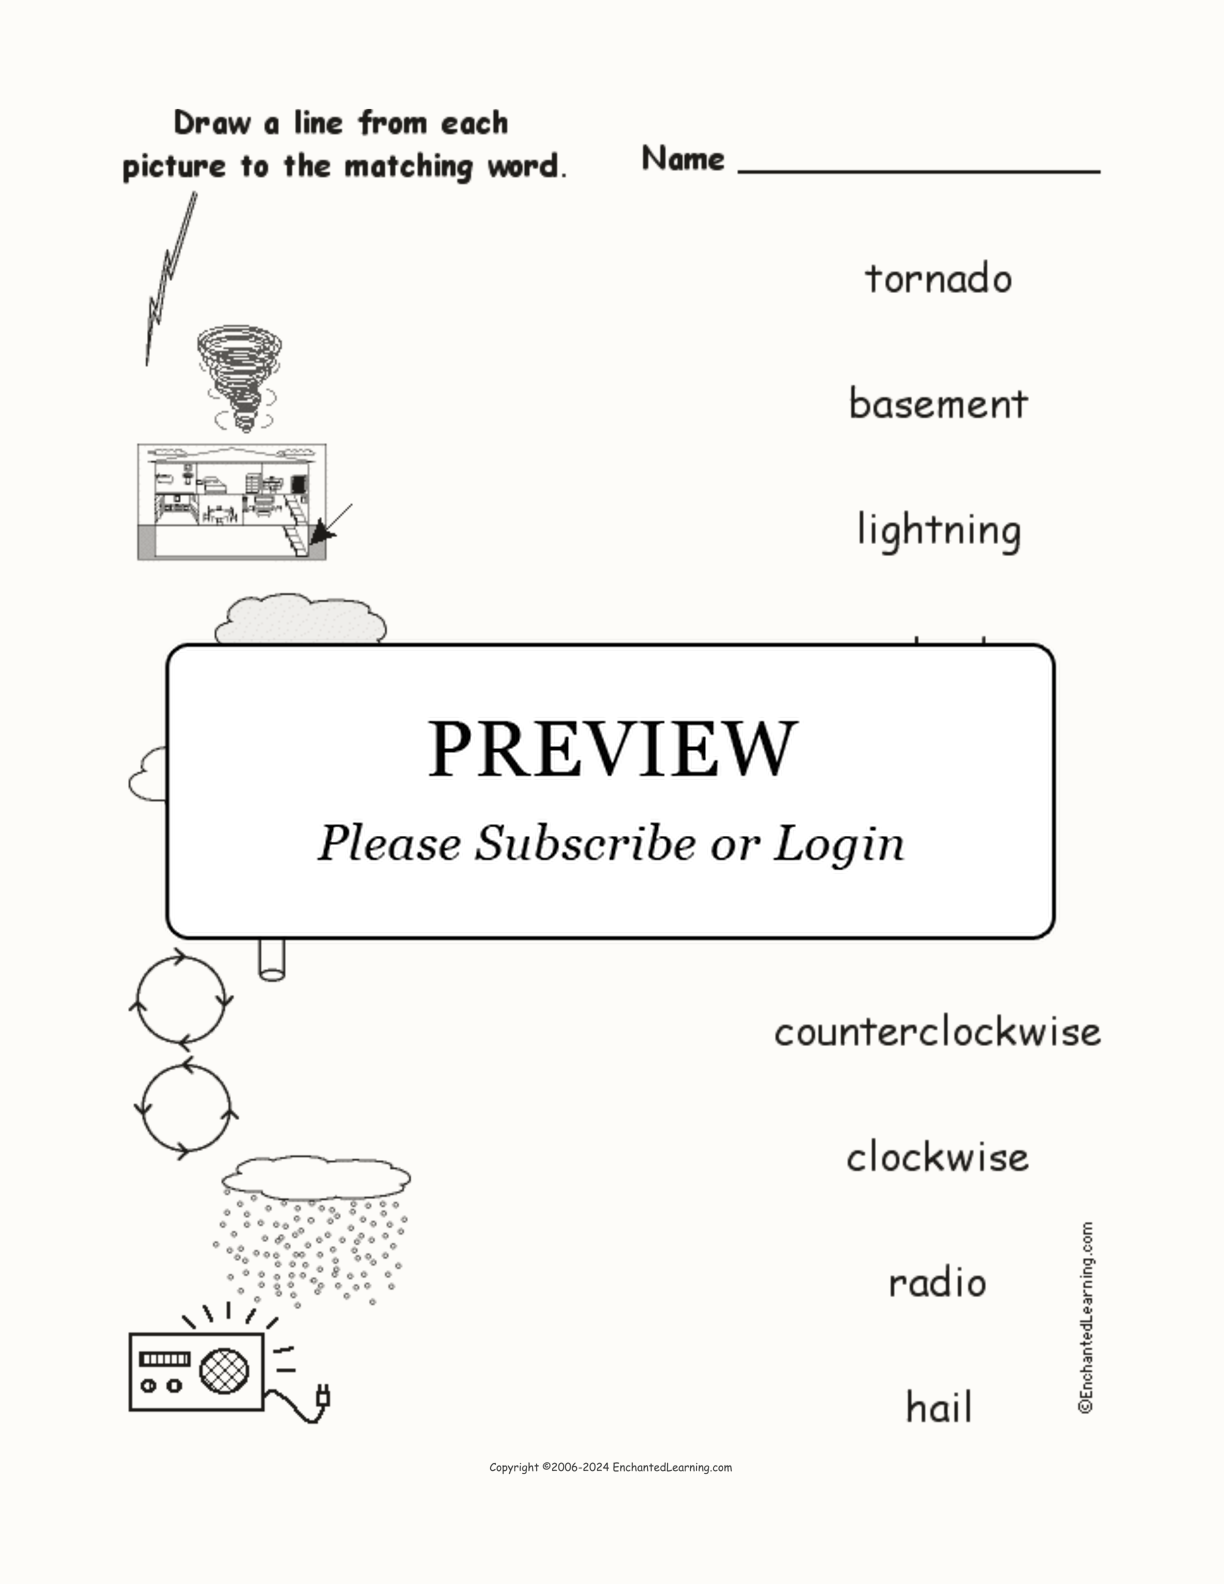 Match Each Tornado Word to its Picture interactive worksheet page 1